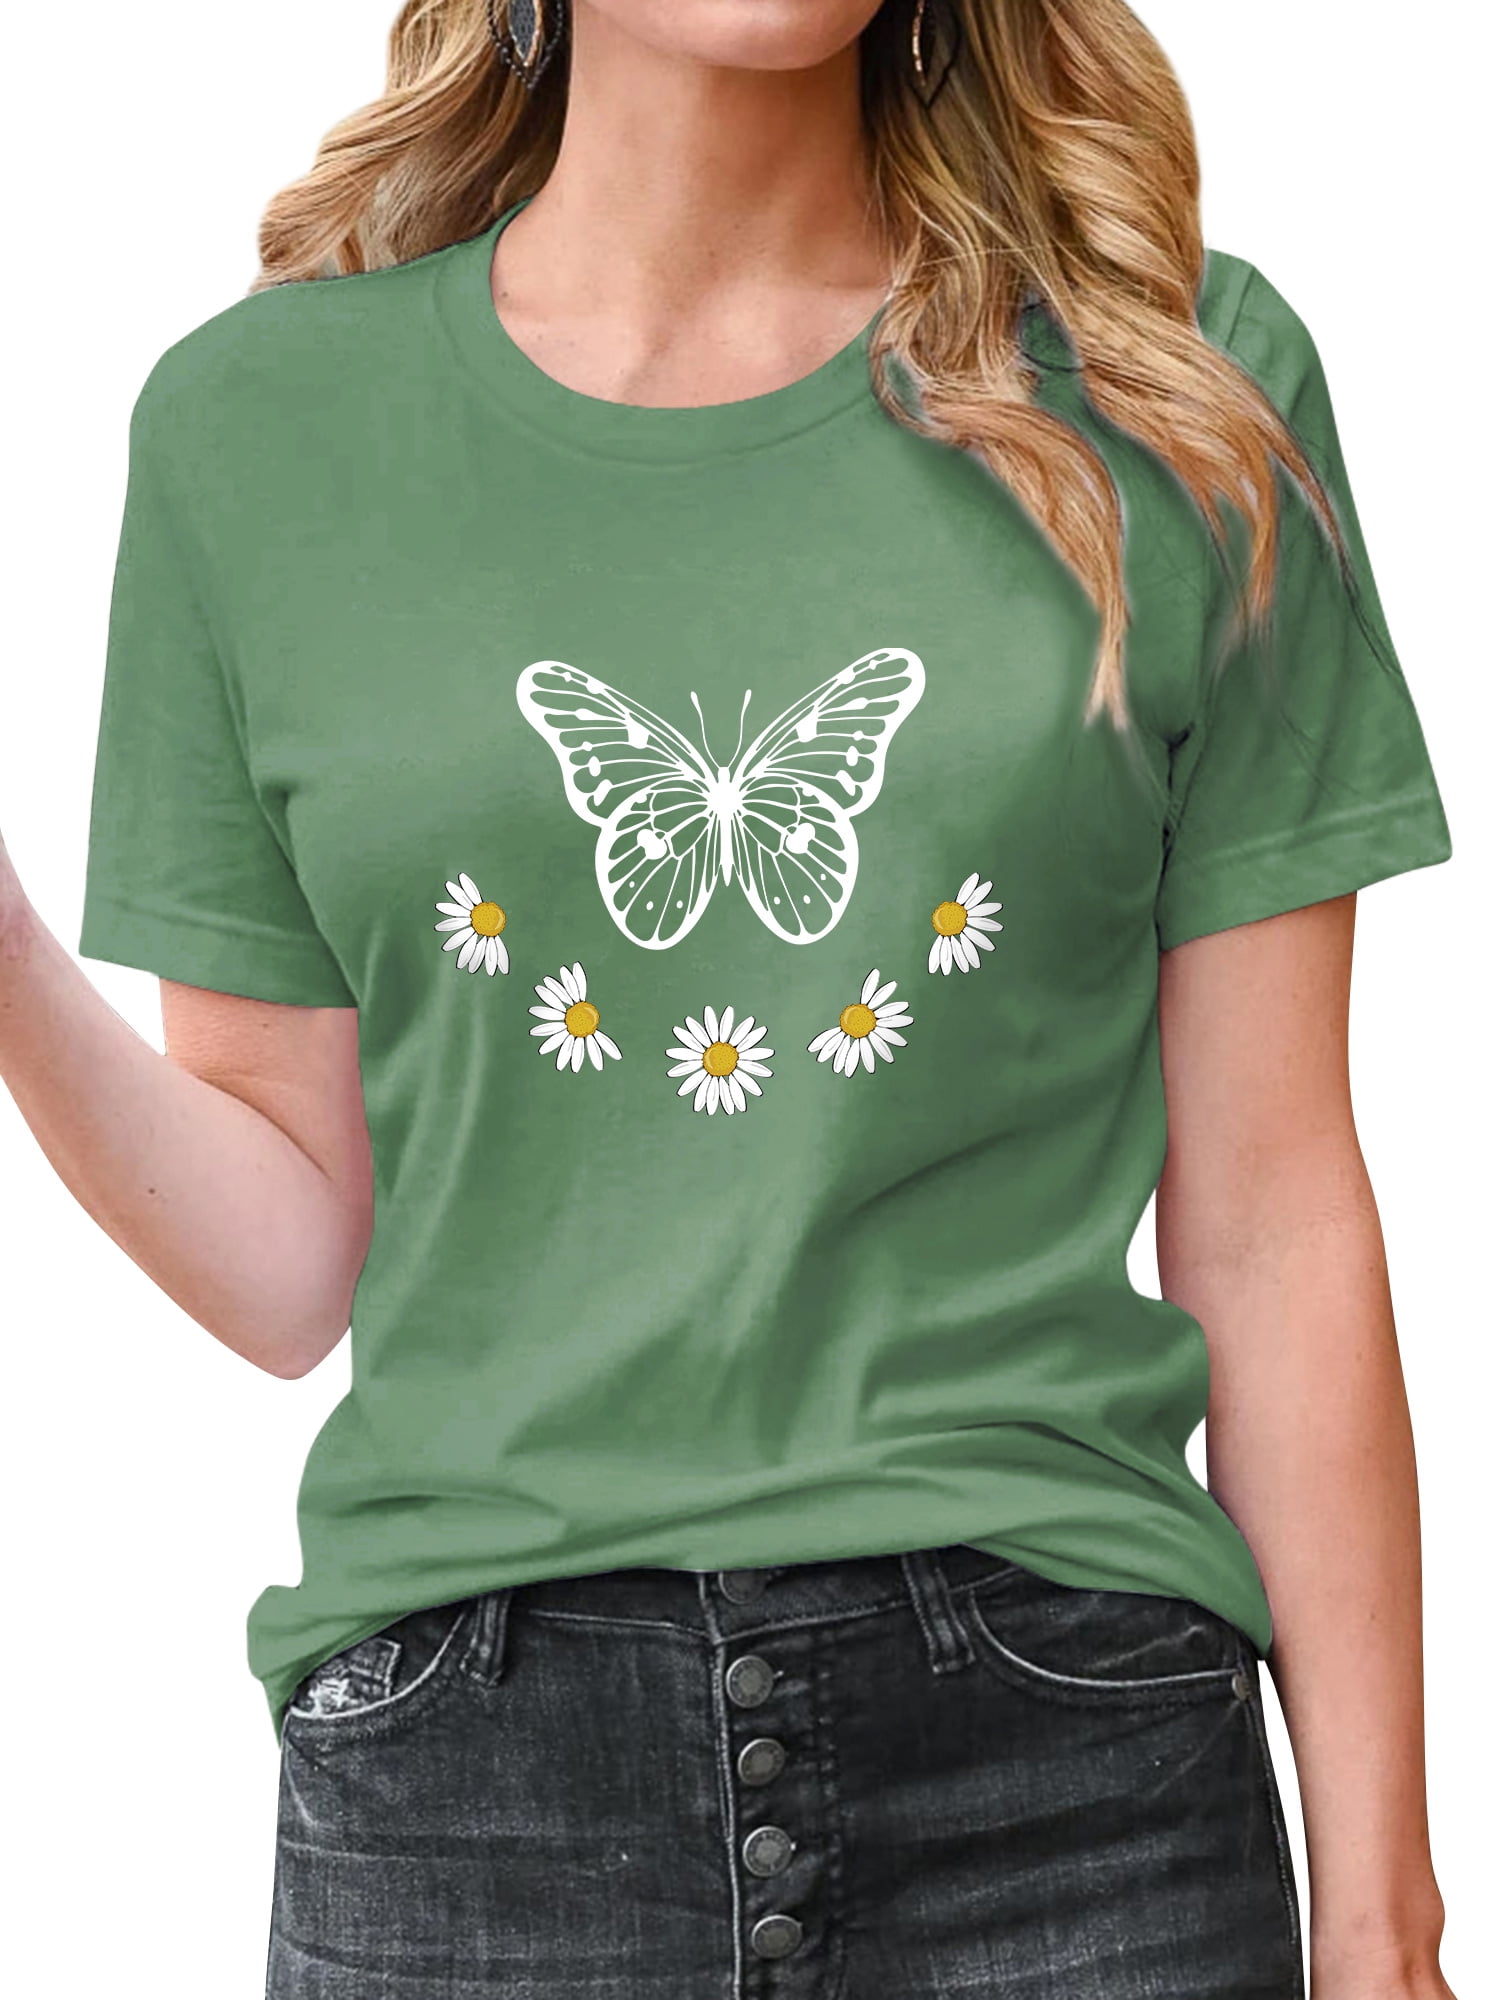 Twzh Women Butterfly With Daisies Print T Shirt Short Sleeve Graphic